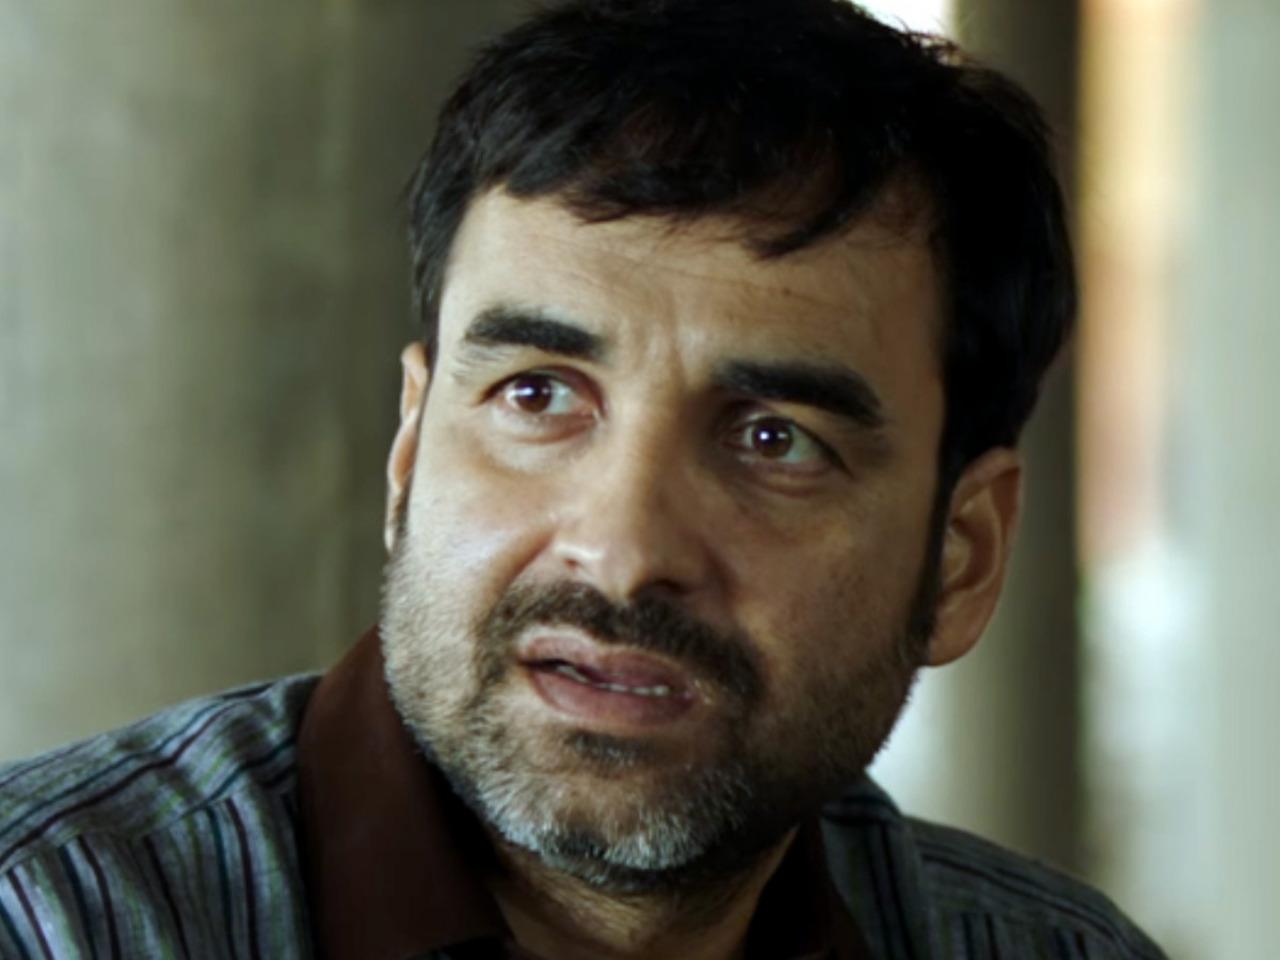 In 'Fukrey Returns' Pankaj Tripathi's character radiated brilliance throughout, commanding every scene he graced. Many have gone so far as to label him as the savior of this sequel